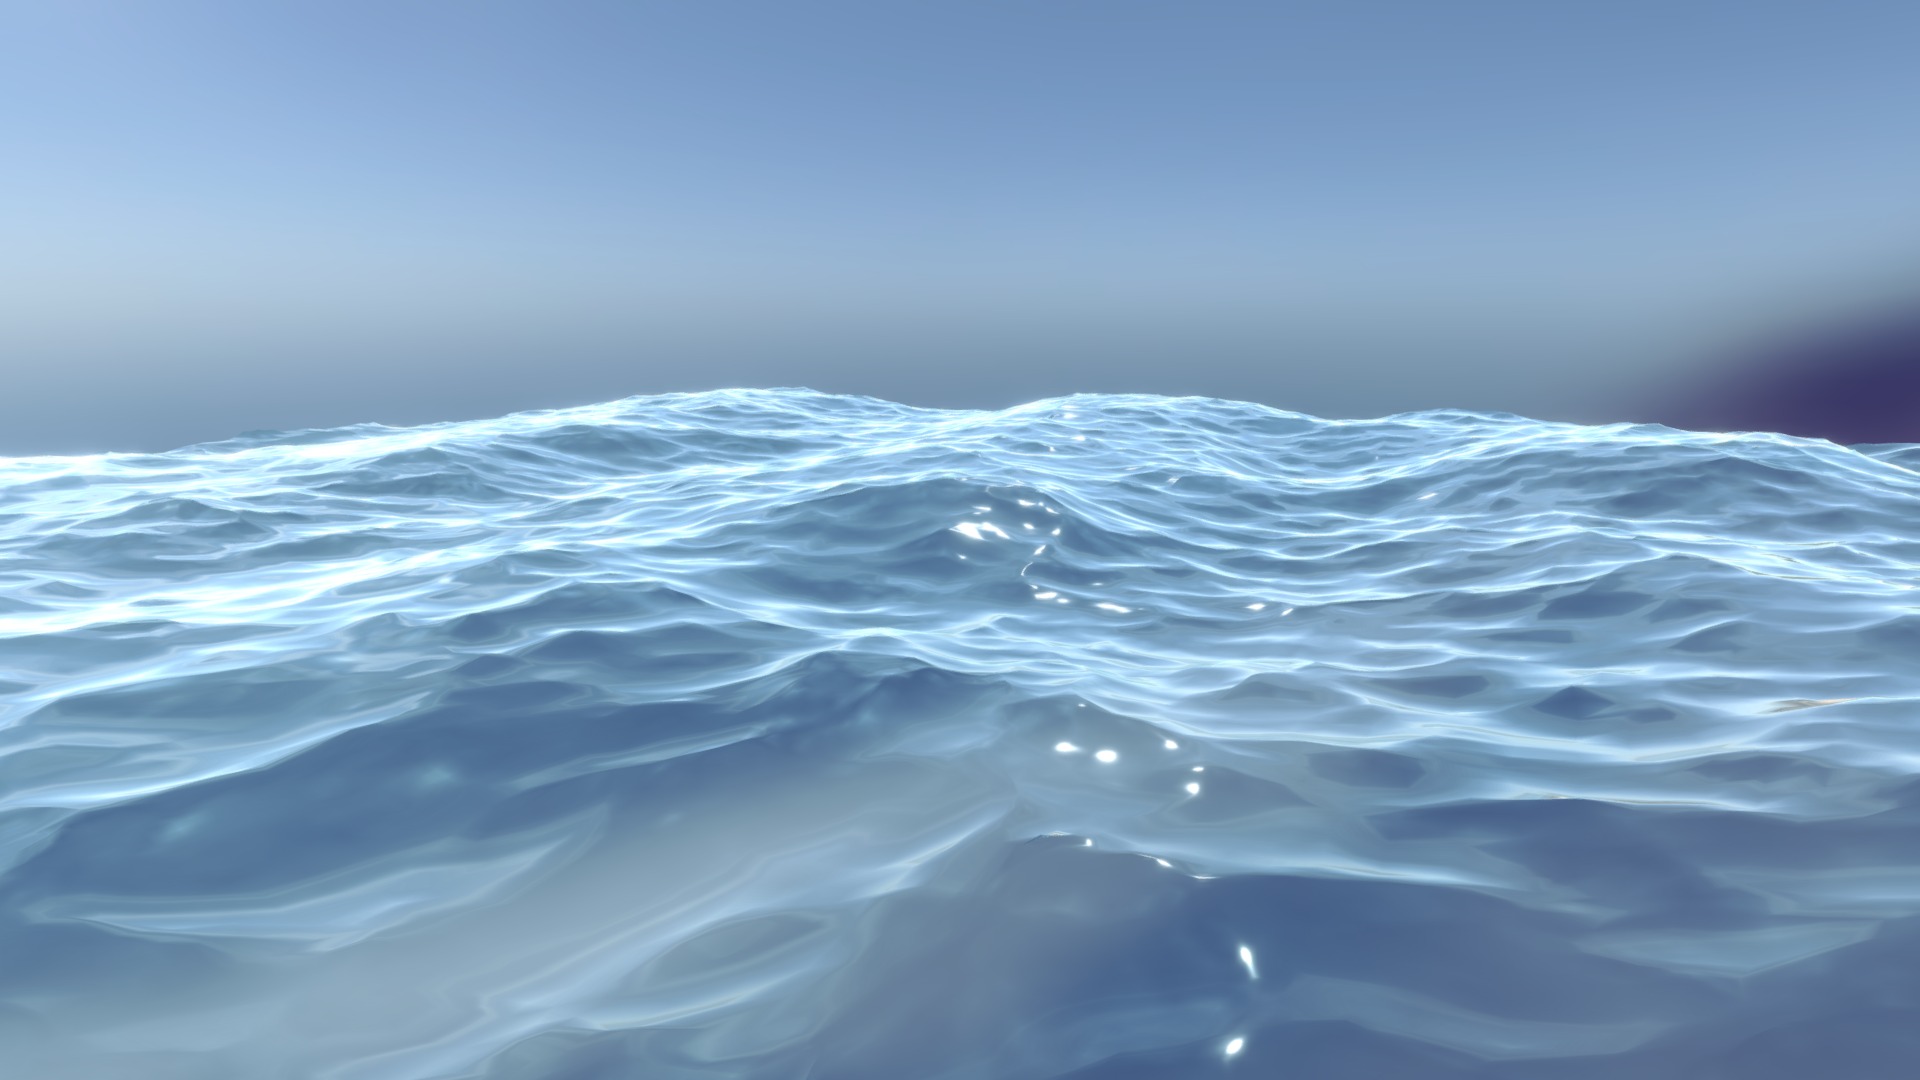 The ocean wave model was made in 3ds max as a morph animation test. Not tested in other software.
After several thousand free downloads, a small price was assigned to the model 3d model